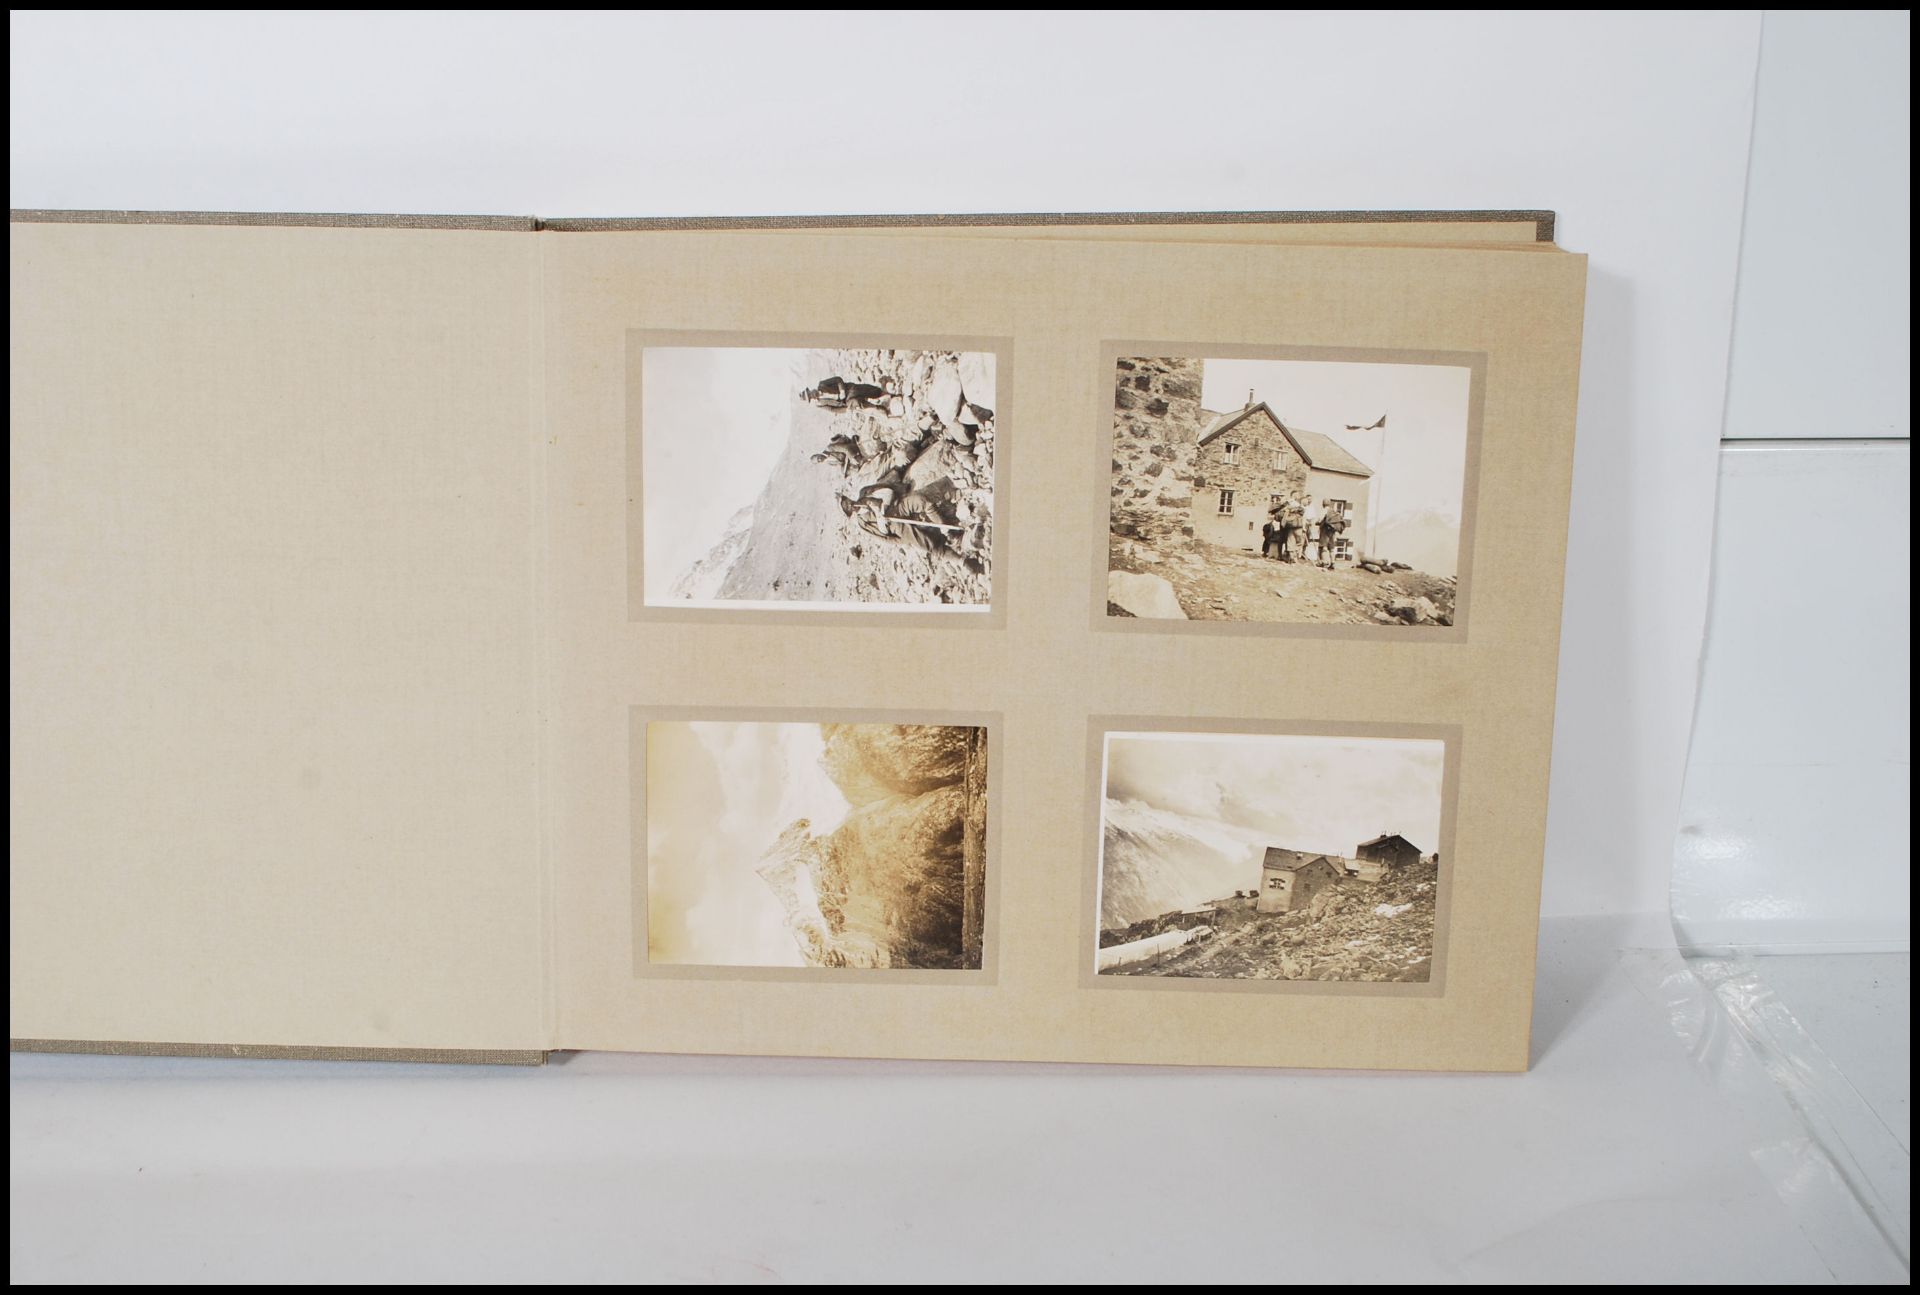 Three Photograph albums circa 1920/30's of trips to Norway and Switzerland showing skiing, - Image 11 of 16